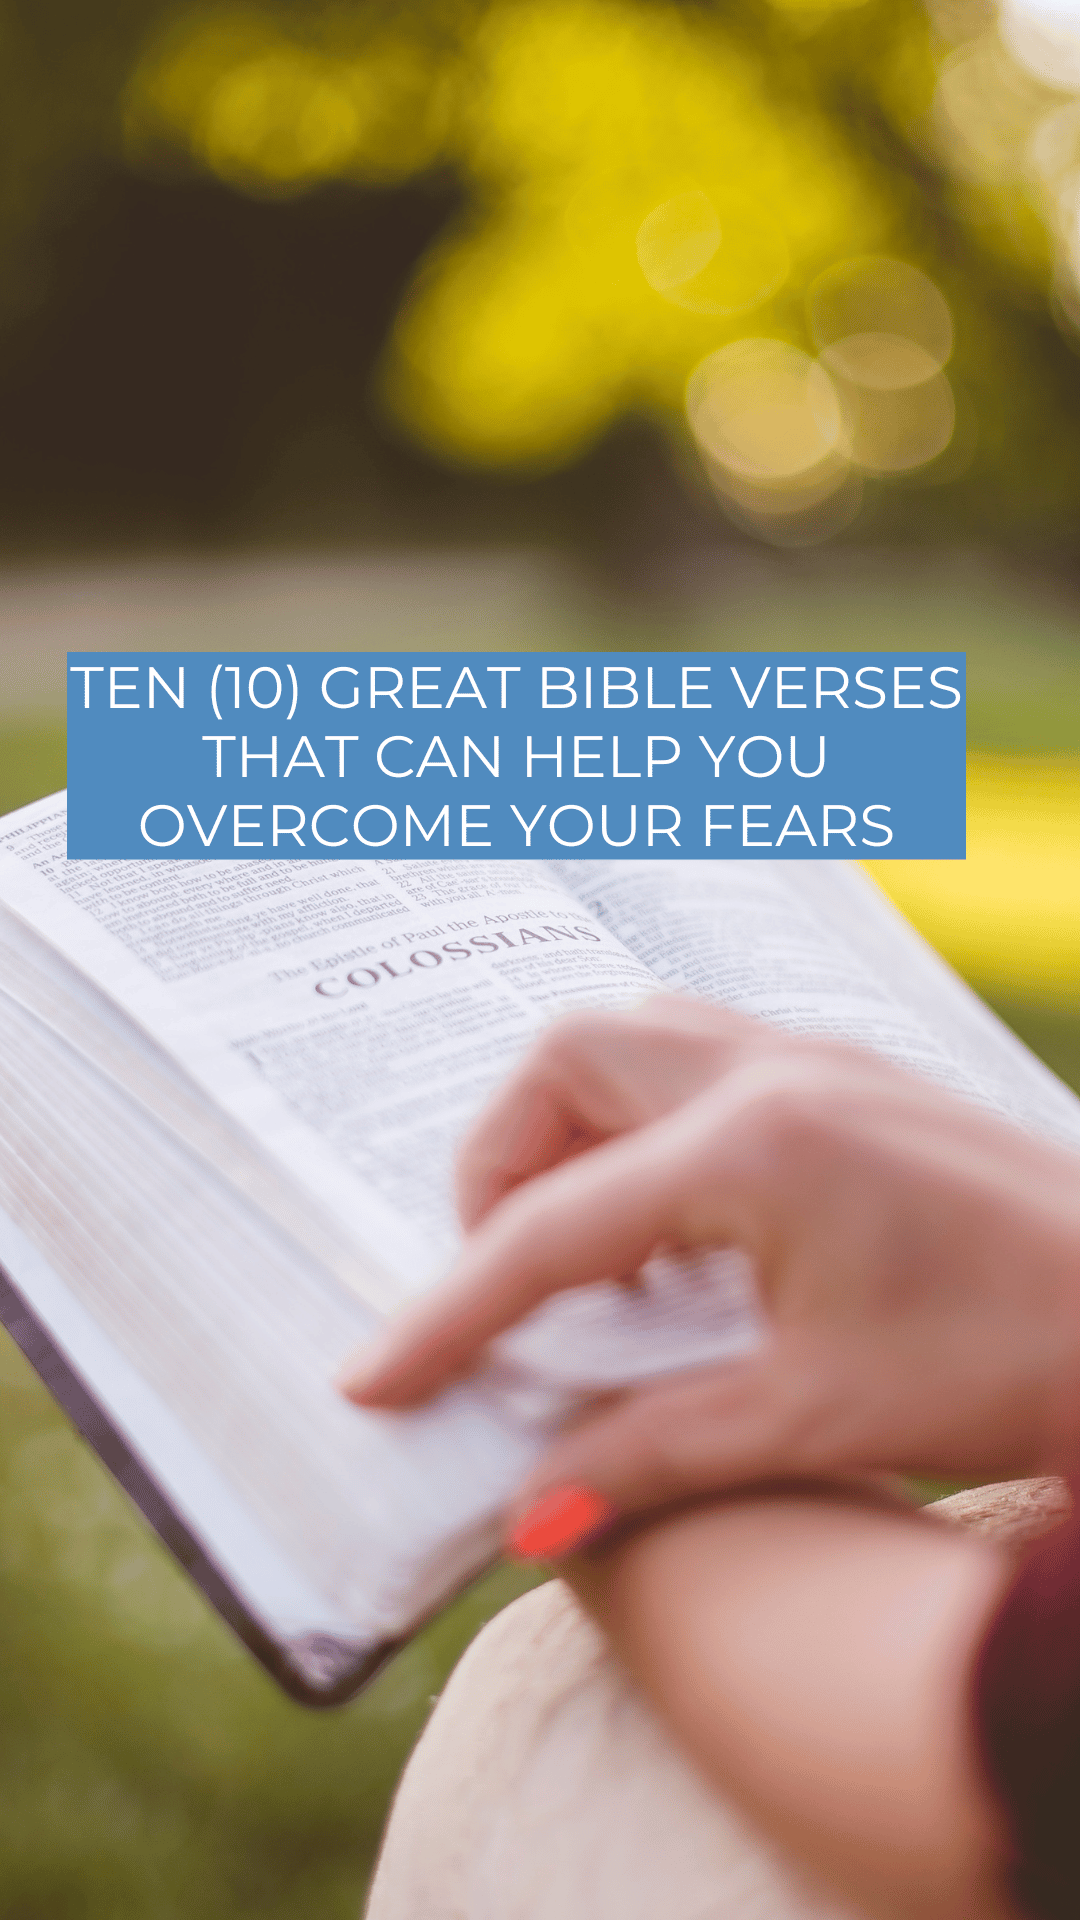 Ten (10) Great Bible Verses That Can Help You Overcome Your Fears